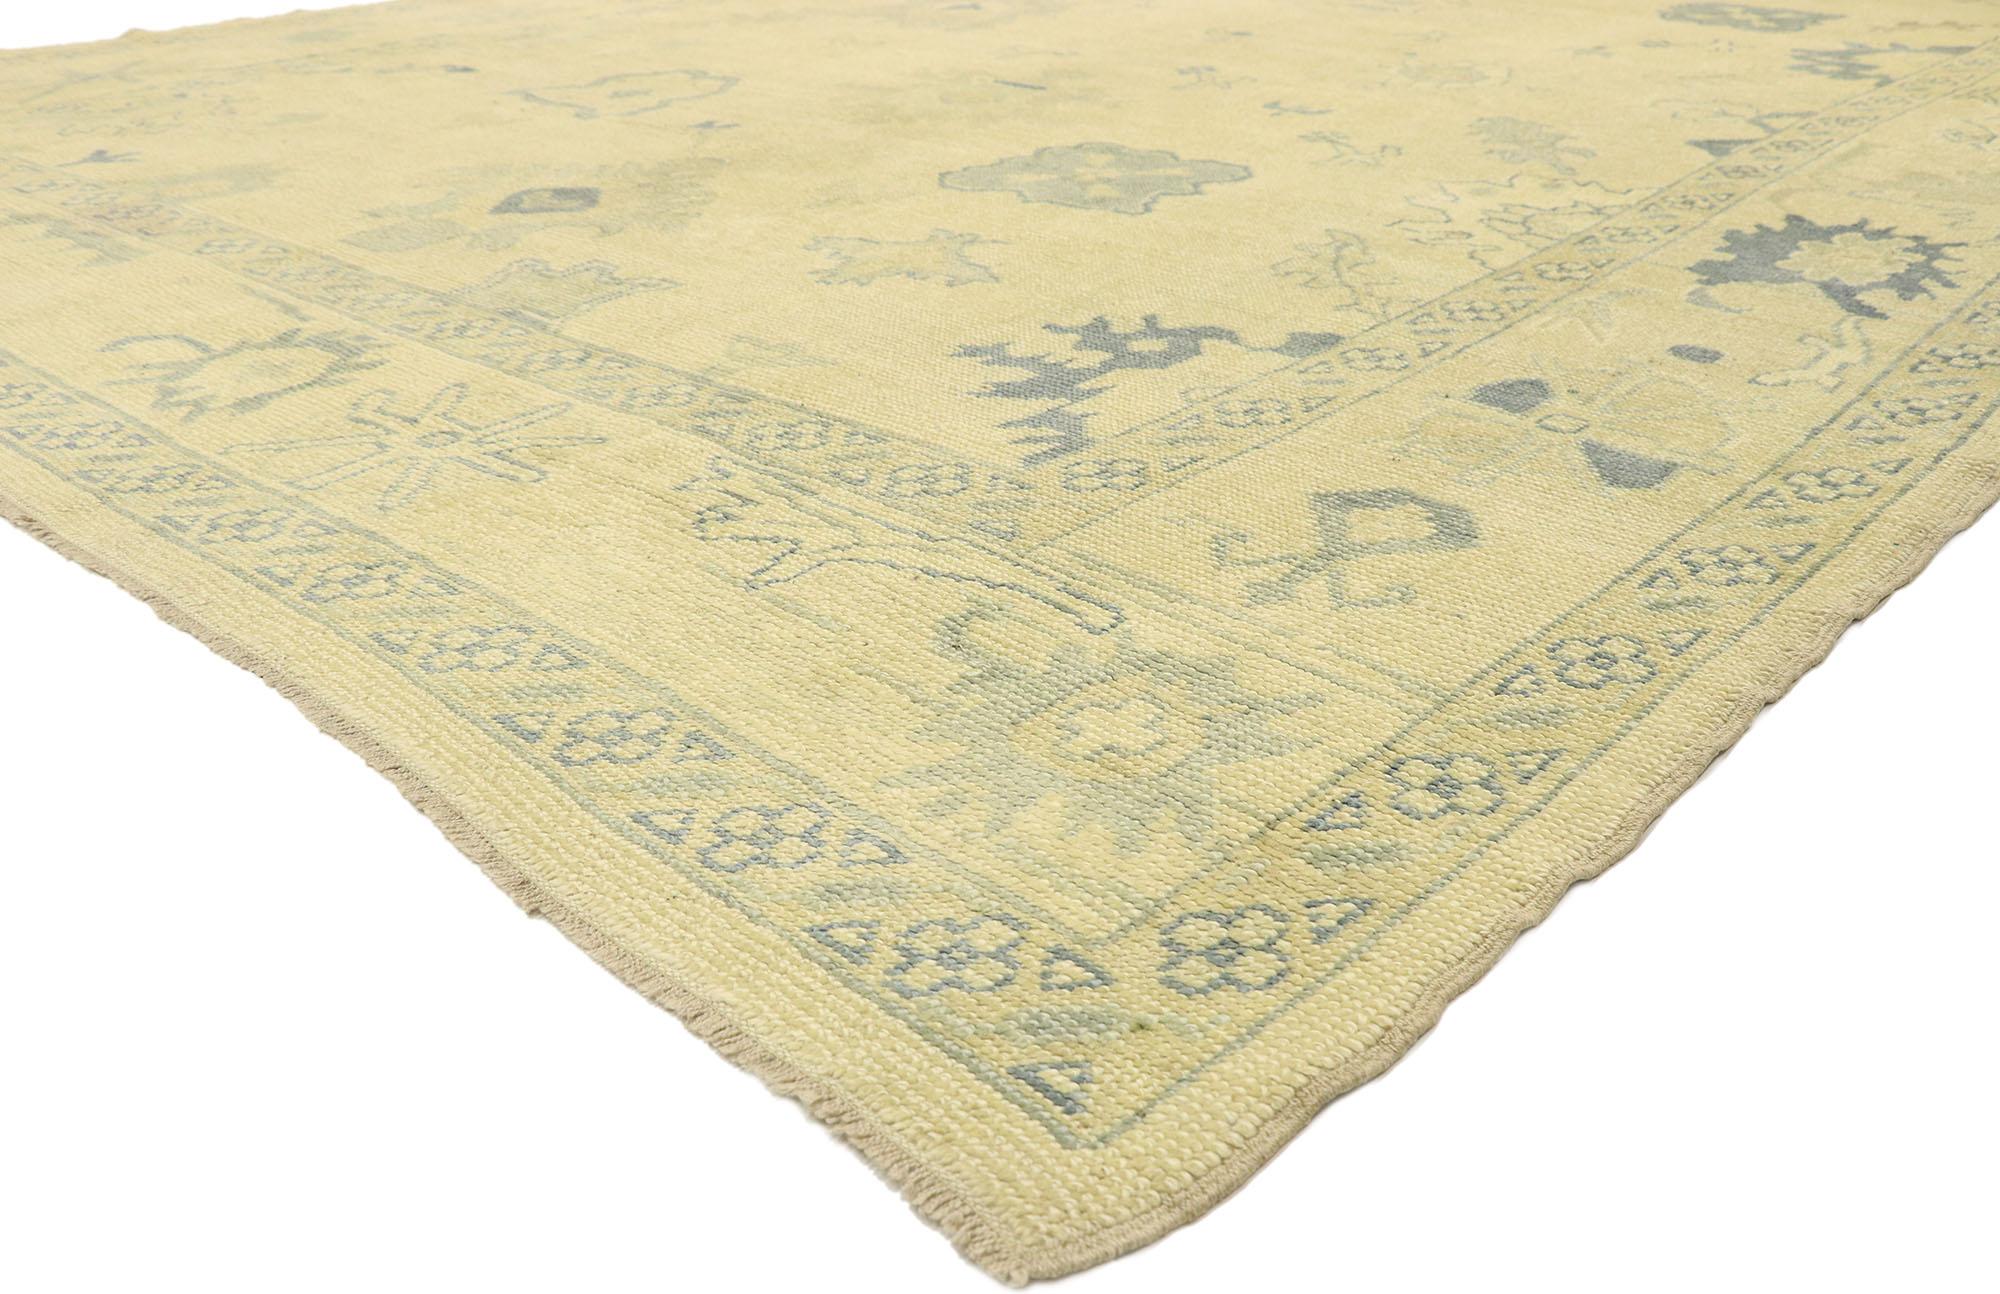 51611 New Contemporary Turkish Oushak Rug with Modern Martha's Vineyard Style. Blending elements from the modern world with light and airy colors, this hand knotted wool contemporary Oushak style area rug will boost the coziness factor in nearly any